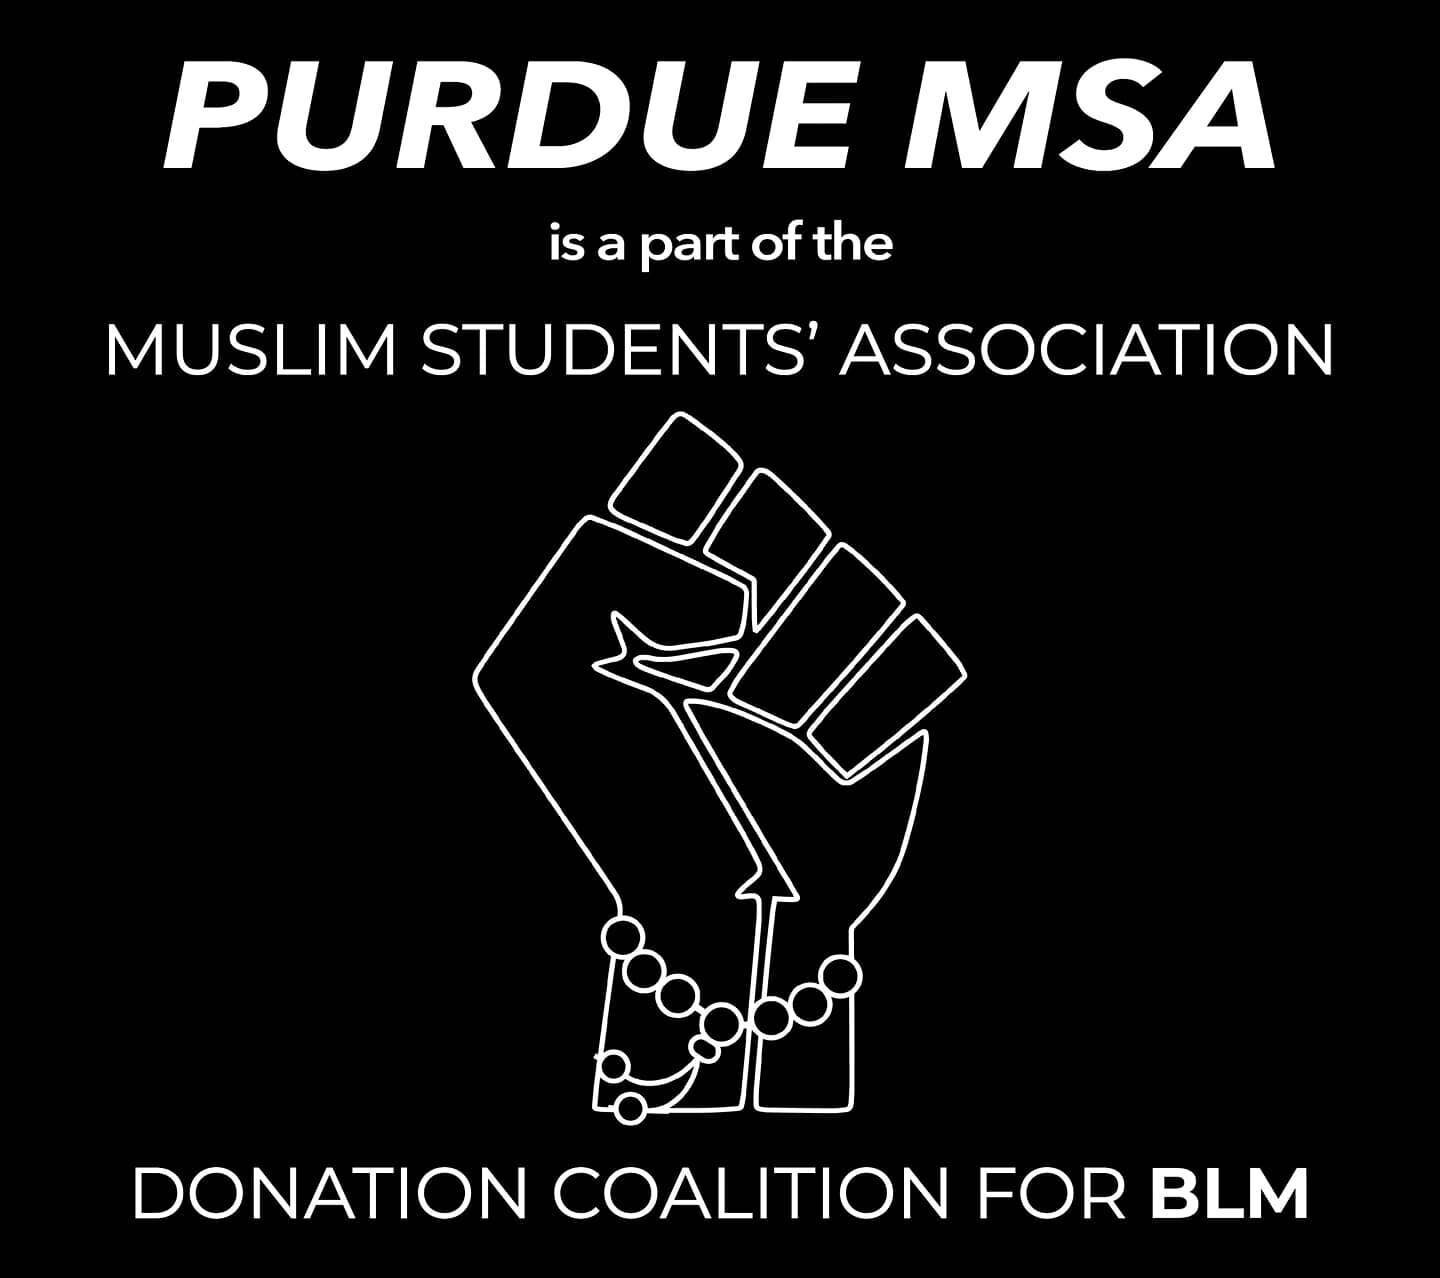 The Purdue MSA is proud to be part of the MSA Donation Coalition for BLM. We, alongside many other MSAs across the nation, are standing in solidarity with our black brothers and sisters by pledging to match donations we receive towards this cause. We